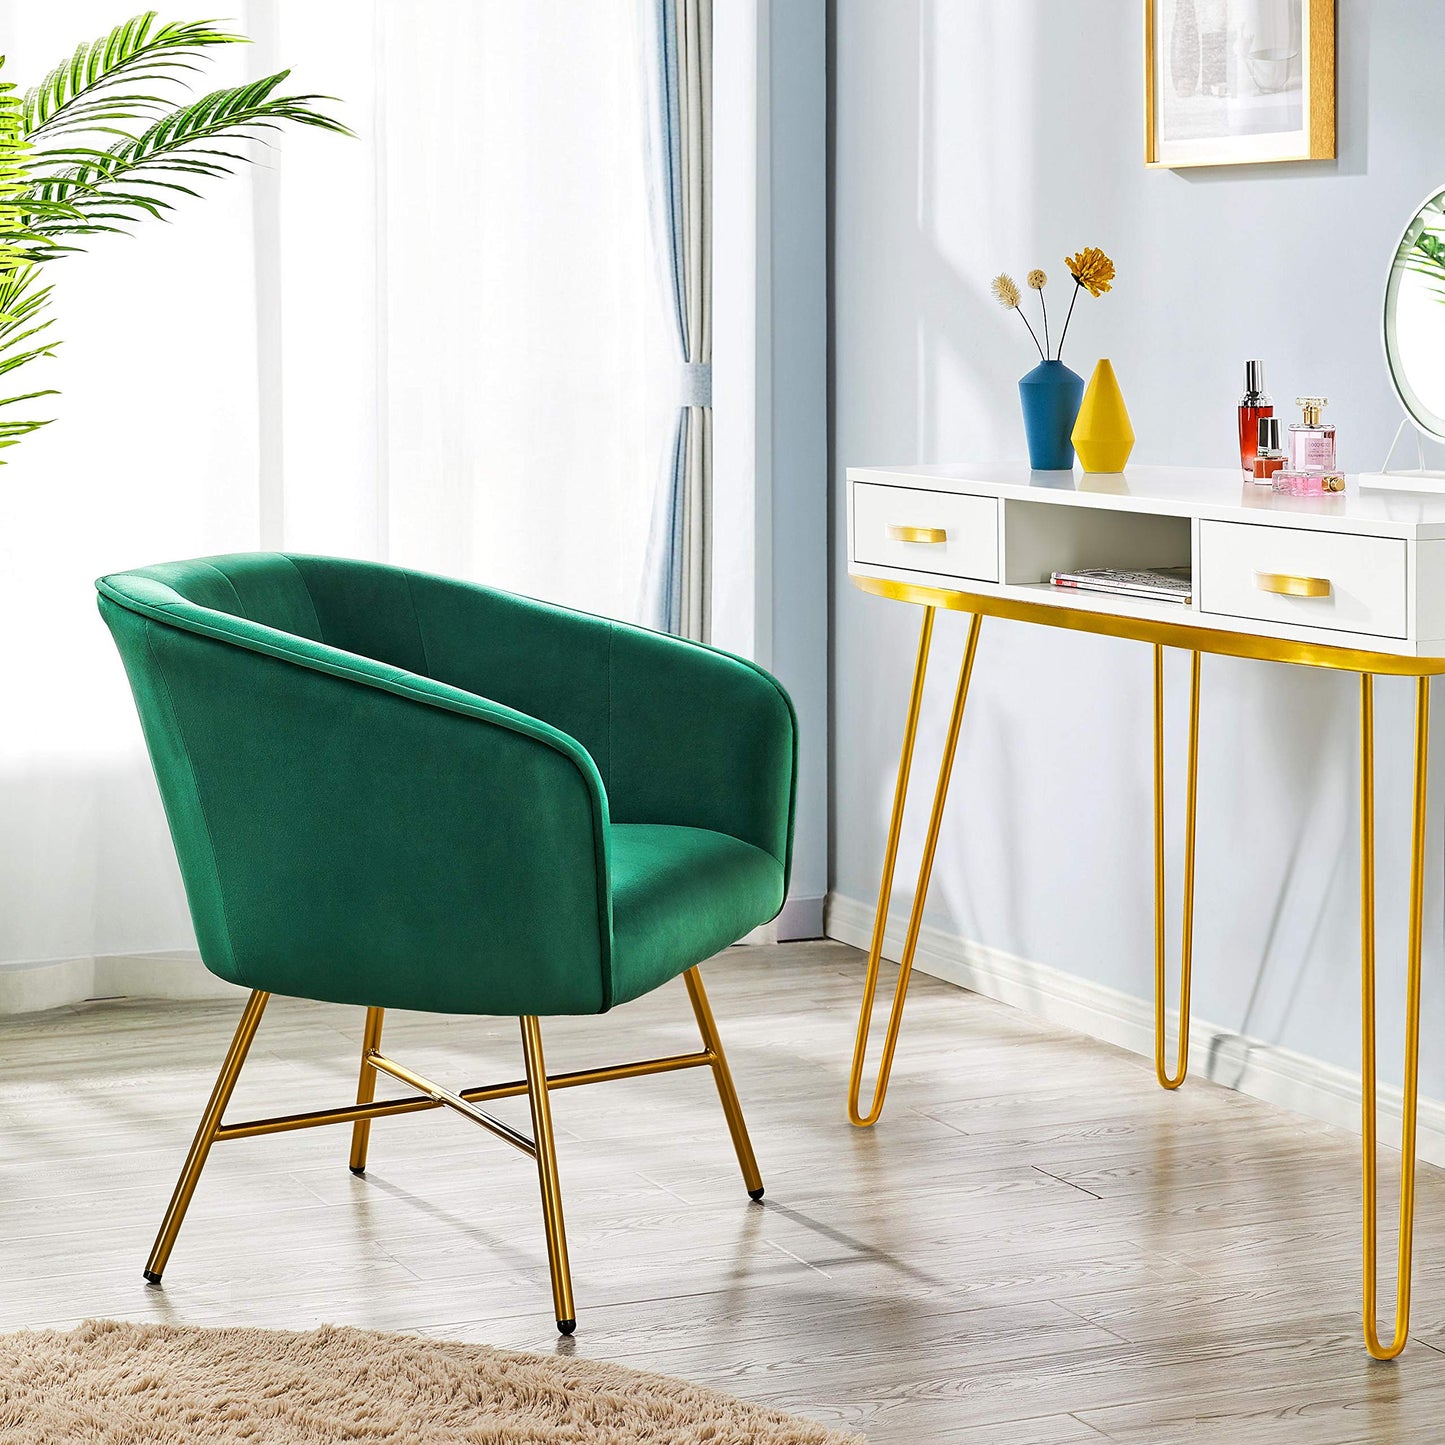 Yaheetech Golden Legs Accent Chair, Modern Velvet Armchair with Metal Legs and Soft Padded, Comfy Side Chair for Living Room/Bedroom/Office/Study/Waiting Room, Green